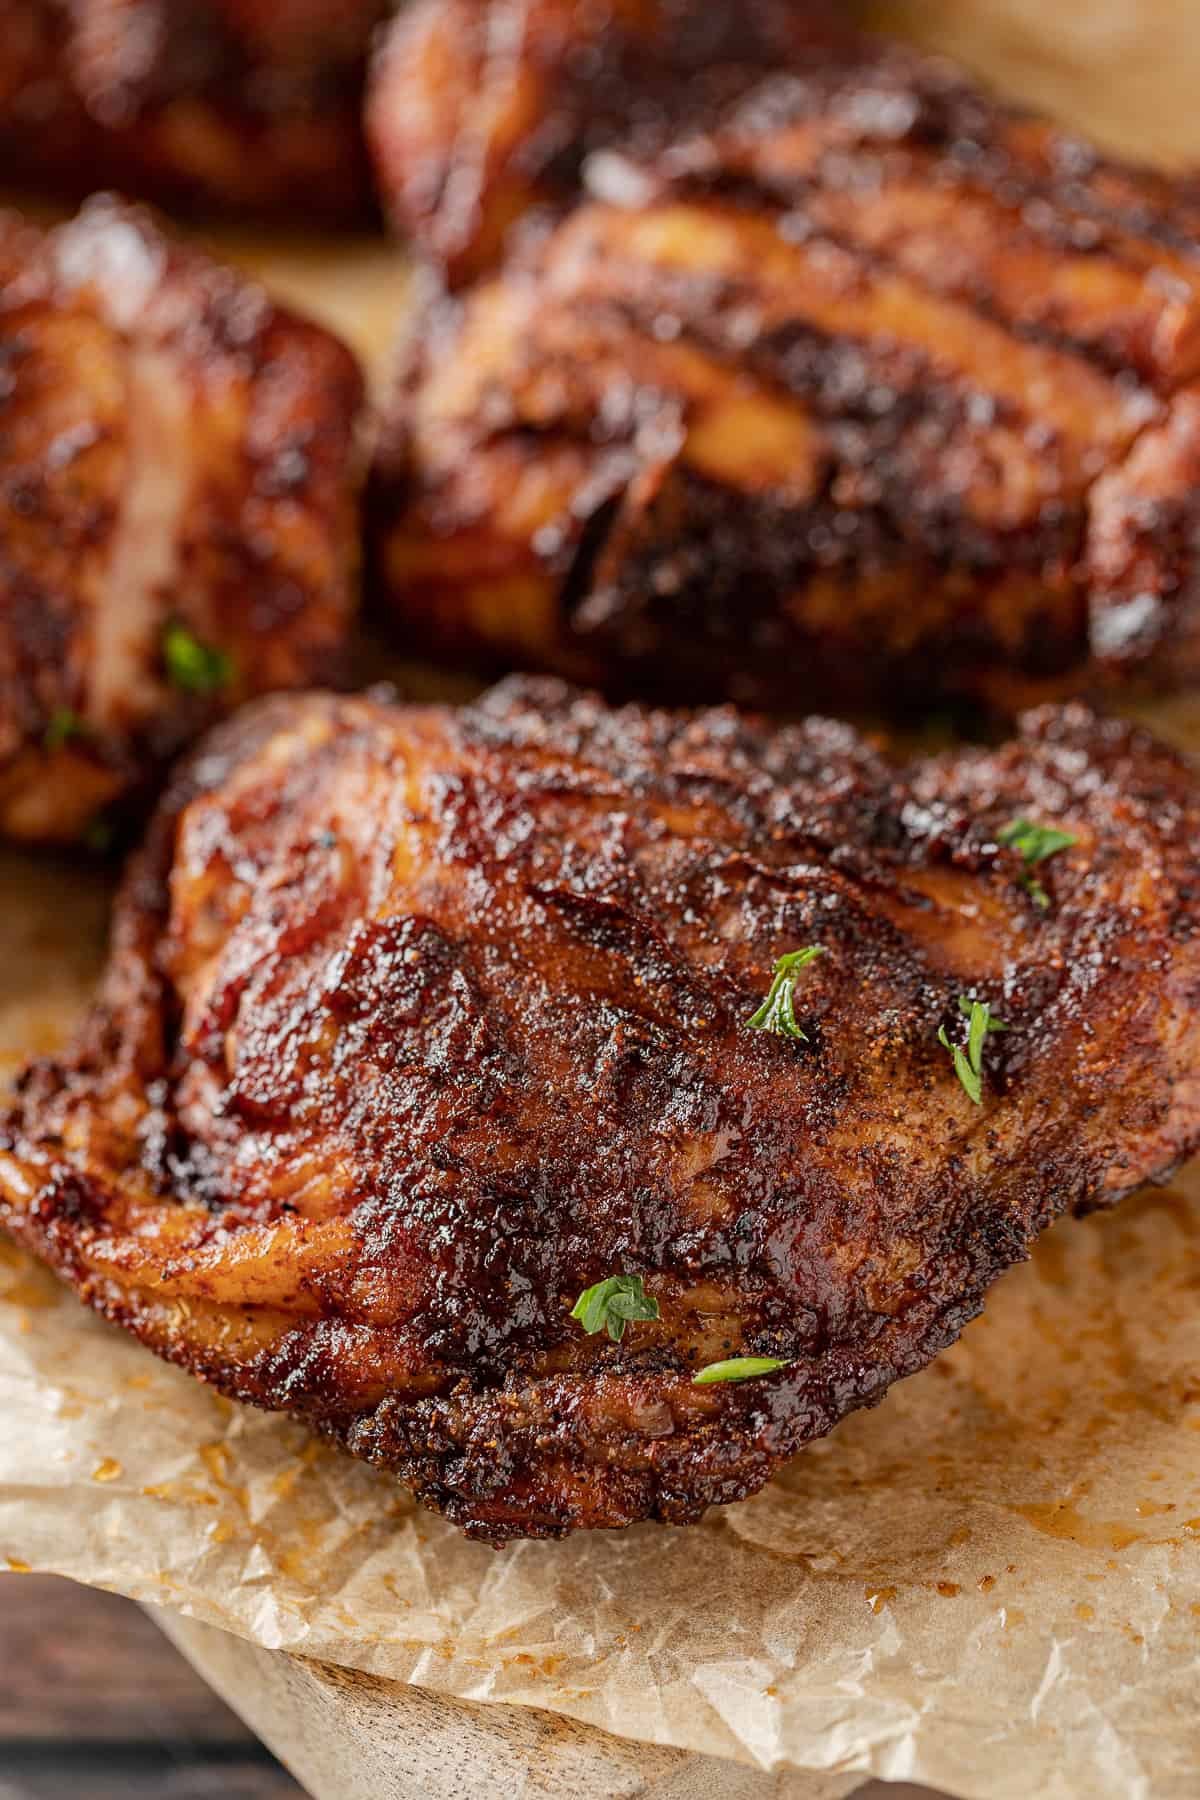 A close up view of a smoked chicken thigh topped with BBQ sauce.